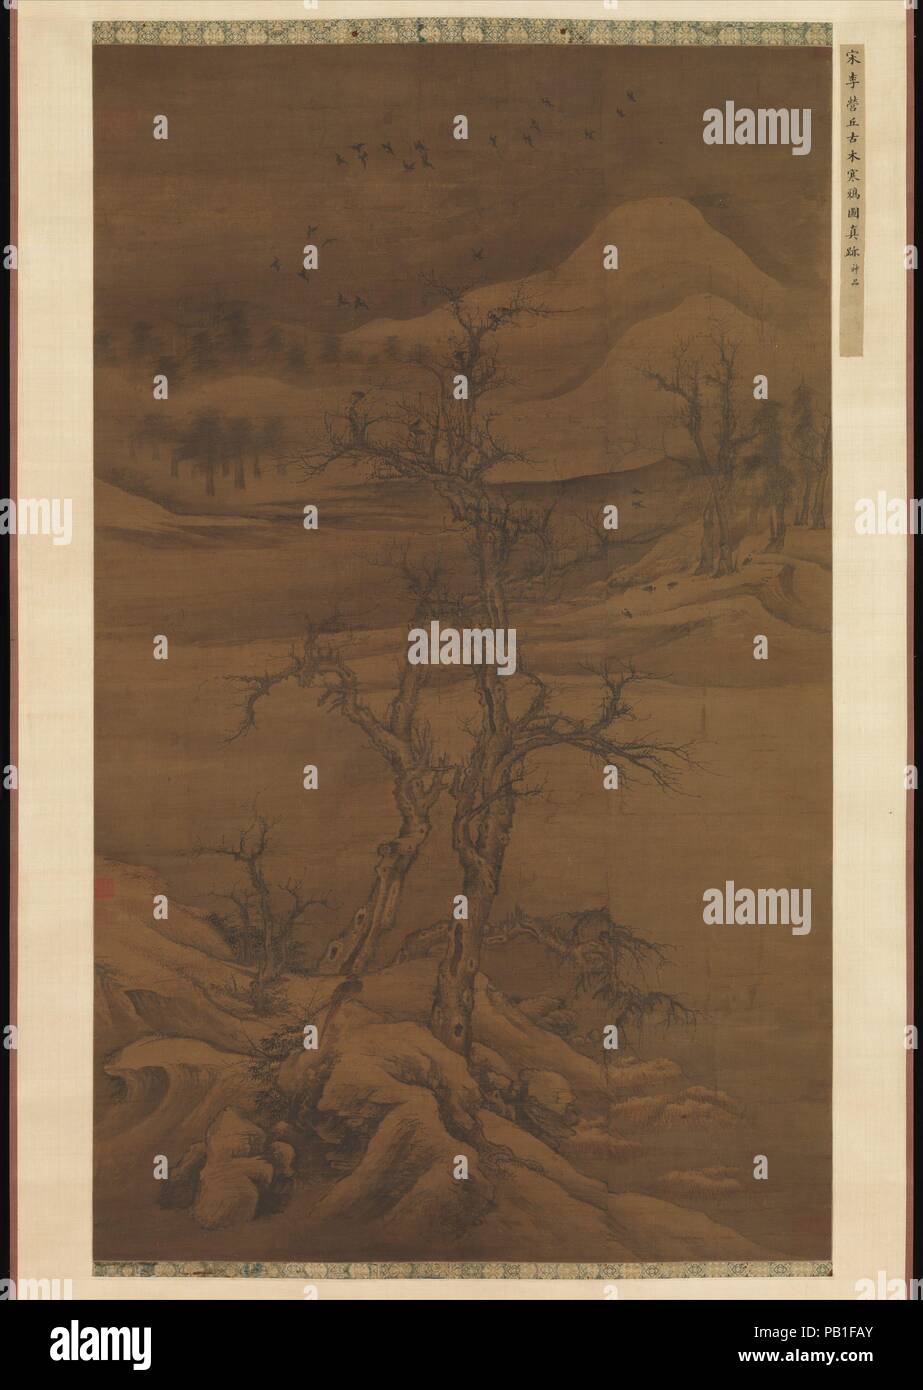 Crows in Old Trees. Artist: Luo Zhichuan (Chinese, active ca. 1300-30). Culture: China. Dimensions: Image: 52 x 31 5/8 in. (132.1 x 80.3 cm)  Overall with mounting: 9 ft. 6 1/4 in. x 38 3/4 in. (290.2 x 98.4 cm)  Overall with knobs: 9 ft. 6 1/4 in. x 42 1/2 in. (290.2 x 108 cm). Date: early 14th century.  This painting, by the southern artist Luo Zhichuan, demonstrates the renewed interest in the brush idioms of the Northern Song artists Li Cheng (919-967) and Guo Xi (ca. 1000-ca. 1090) that grew after the Mongol conquest forcefully reunified north and south China in 1279. Luo's painting may b Stock Photo